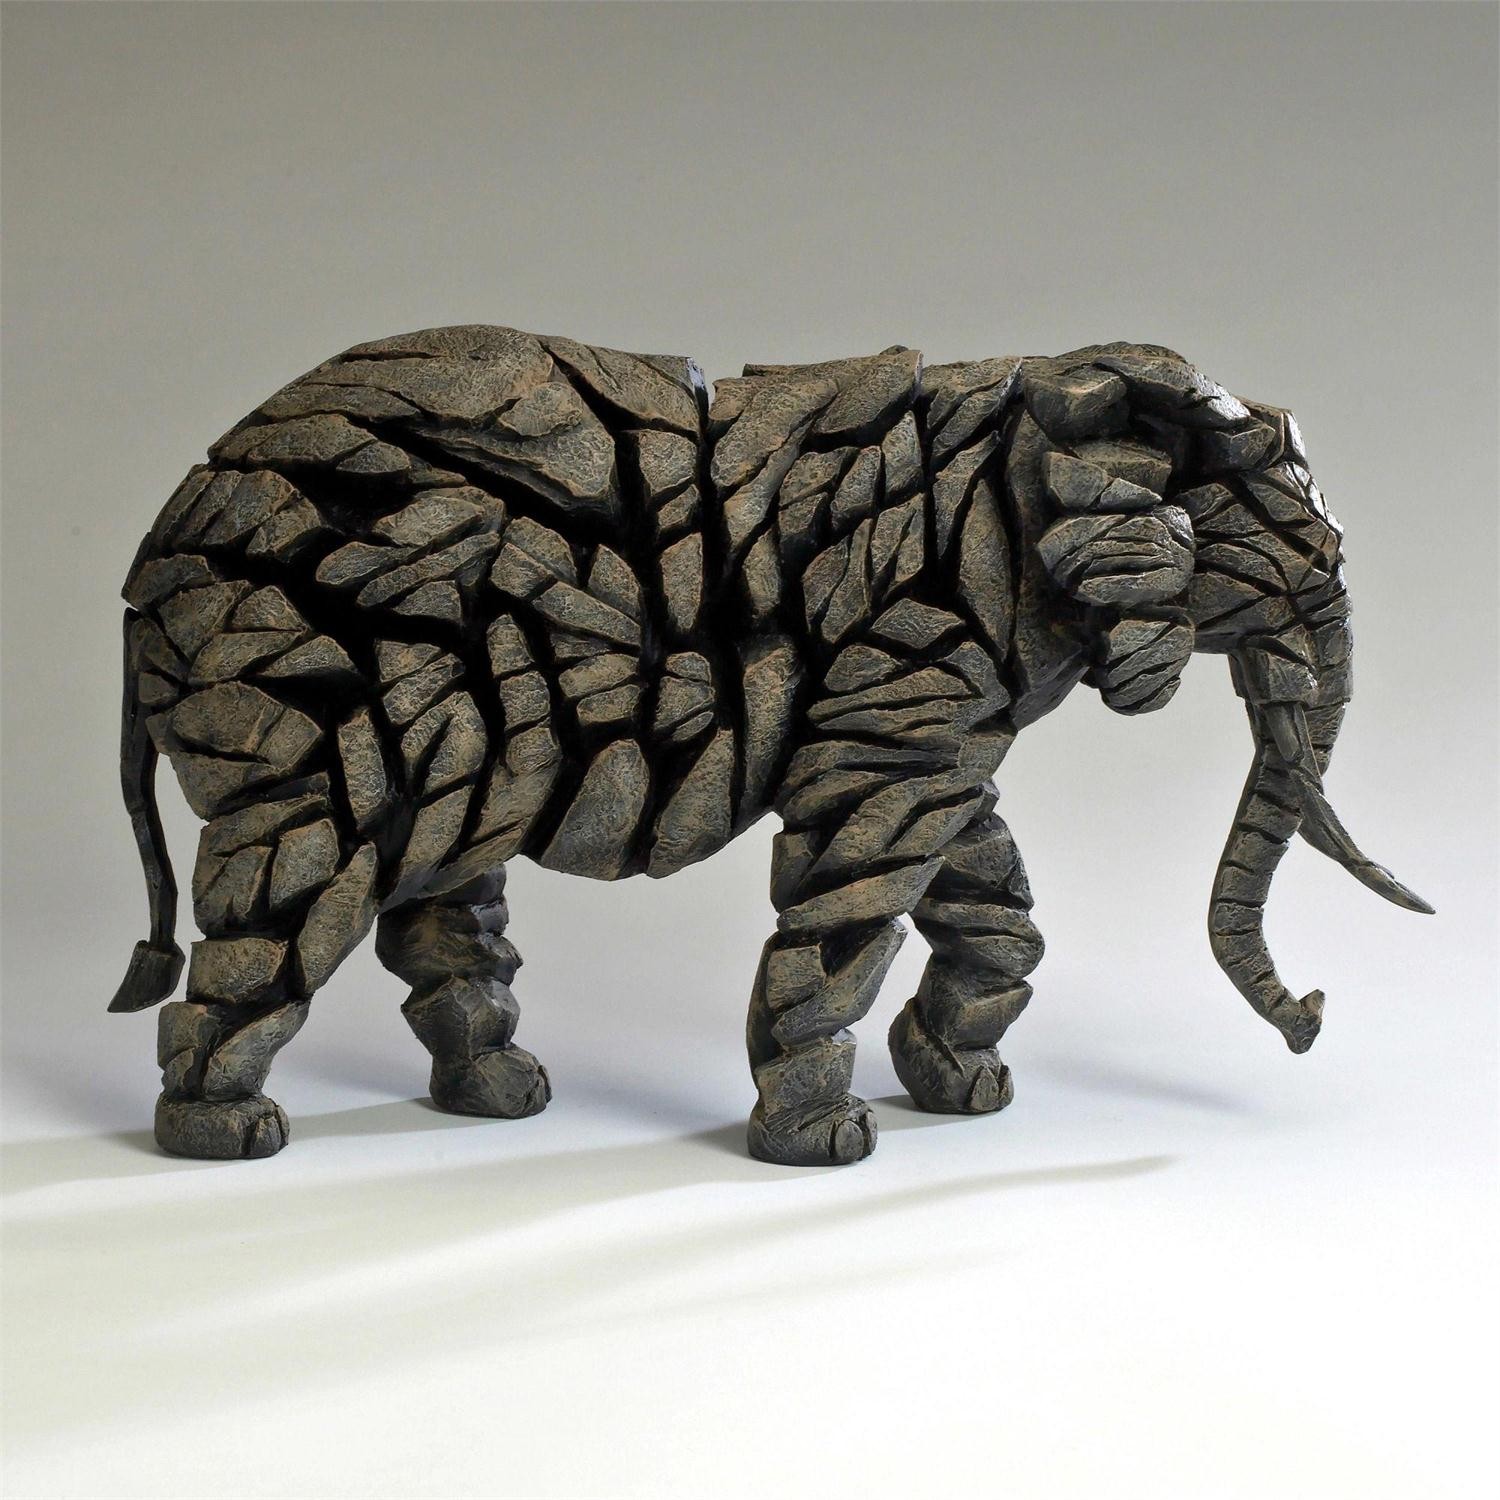 Enesco Gifts Artist Matt Buckley The Edge Sculpture Elephant Figurine Free Shipping Ivey's Gifts And Decoor